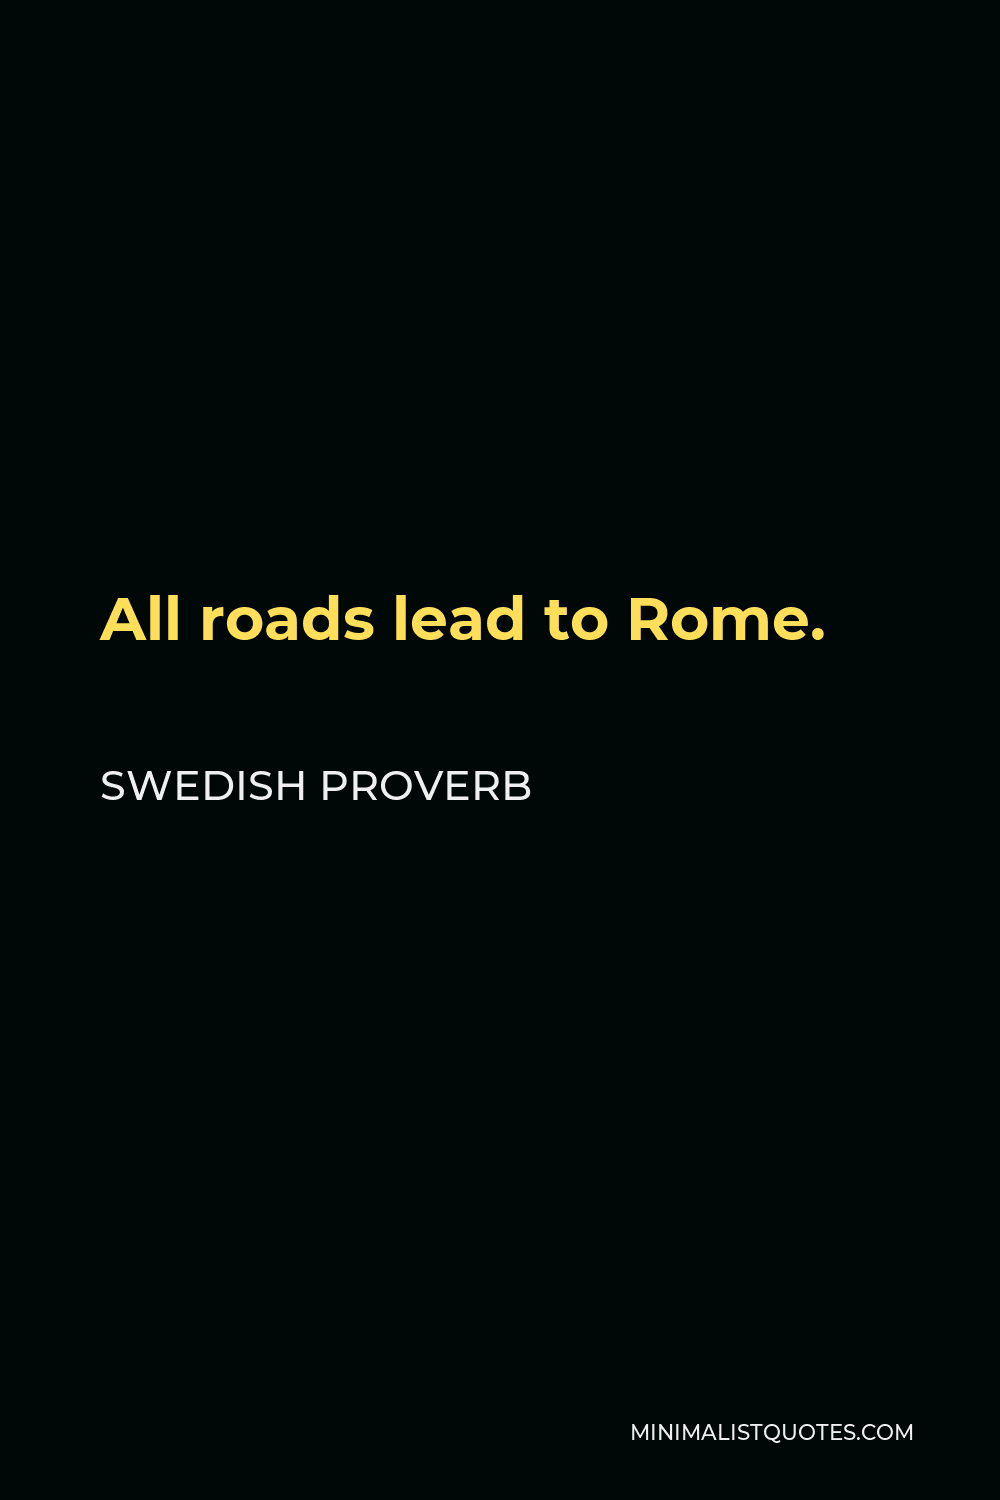 Swedish Proverb Quote - All roads lead to Rome.